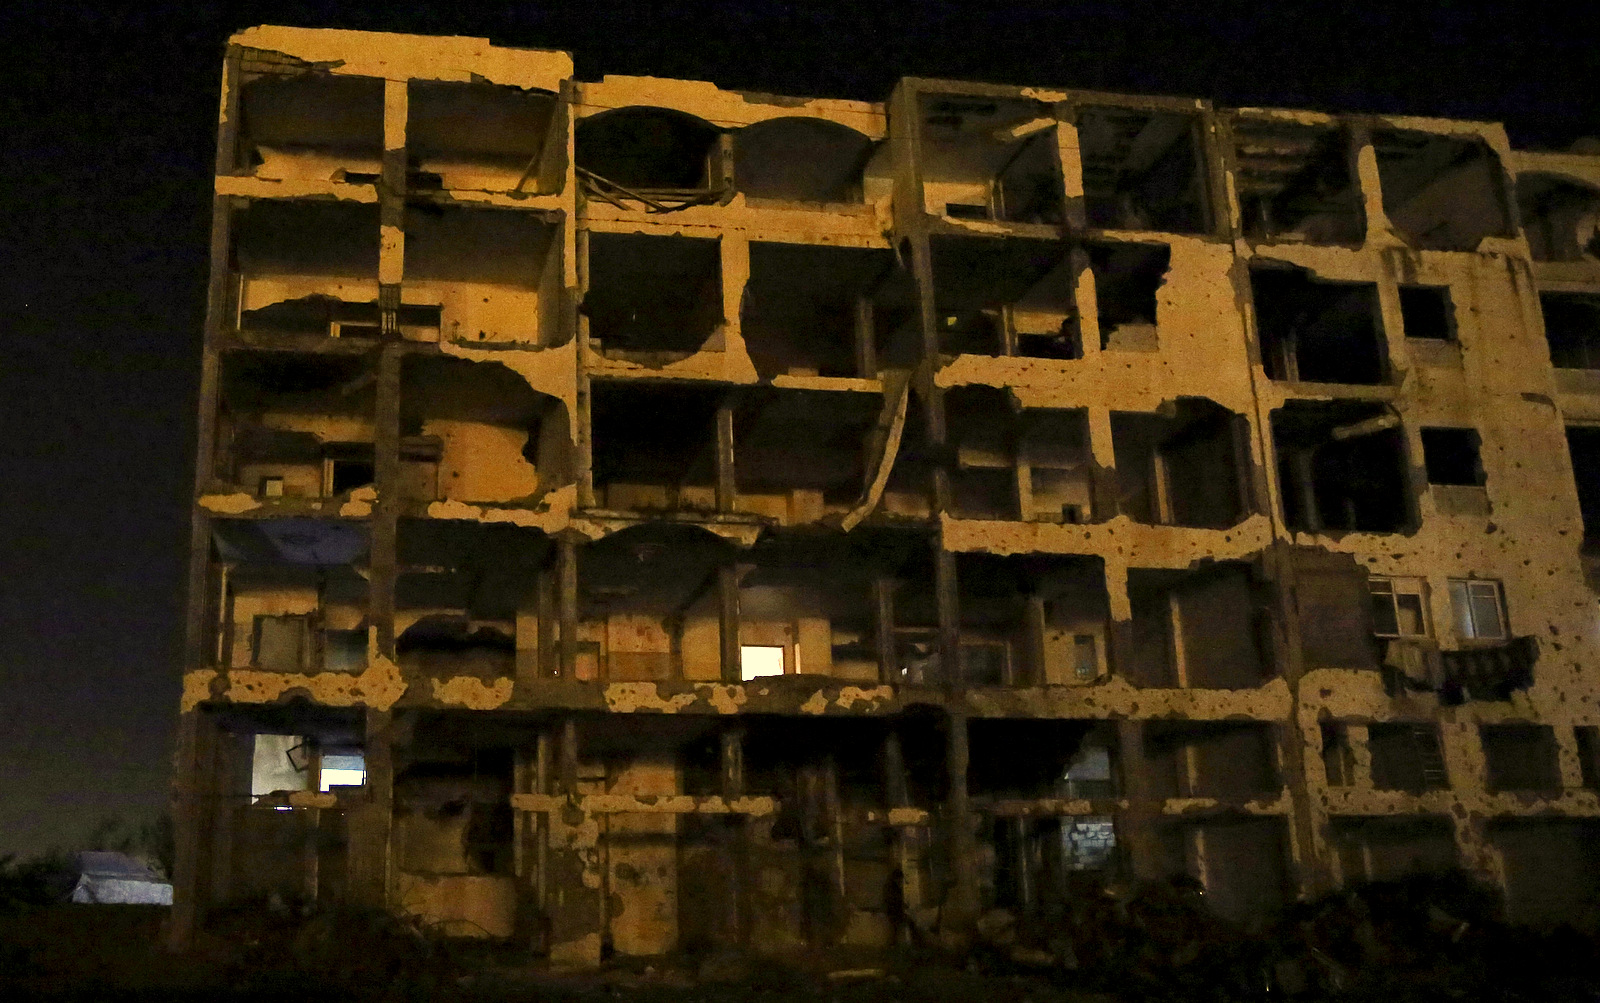 An apartment block, which was destroyed during the 2014 Israeli assault on Gaza is lit by LED lamps, during a power outage in Beit Lahiya, Gaza Strip. Electricity is available for as little as three hours a day in Gaza, and gas used for heating and cooking is in short supply. (AP Photo/Adel Hana)